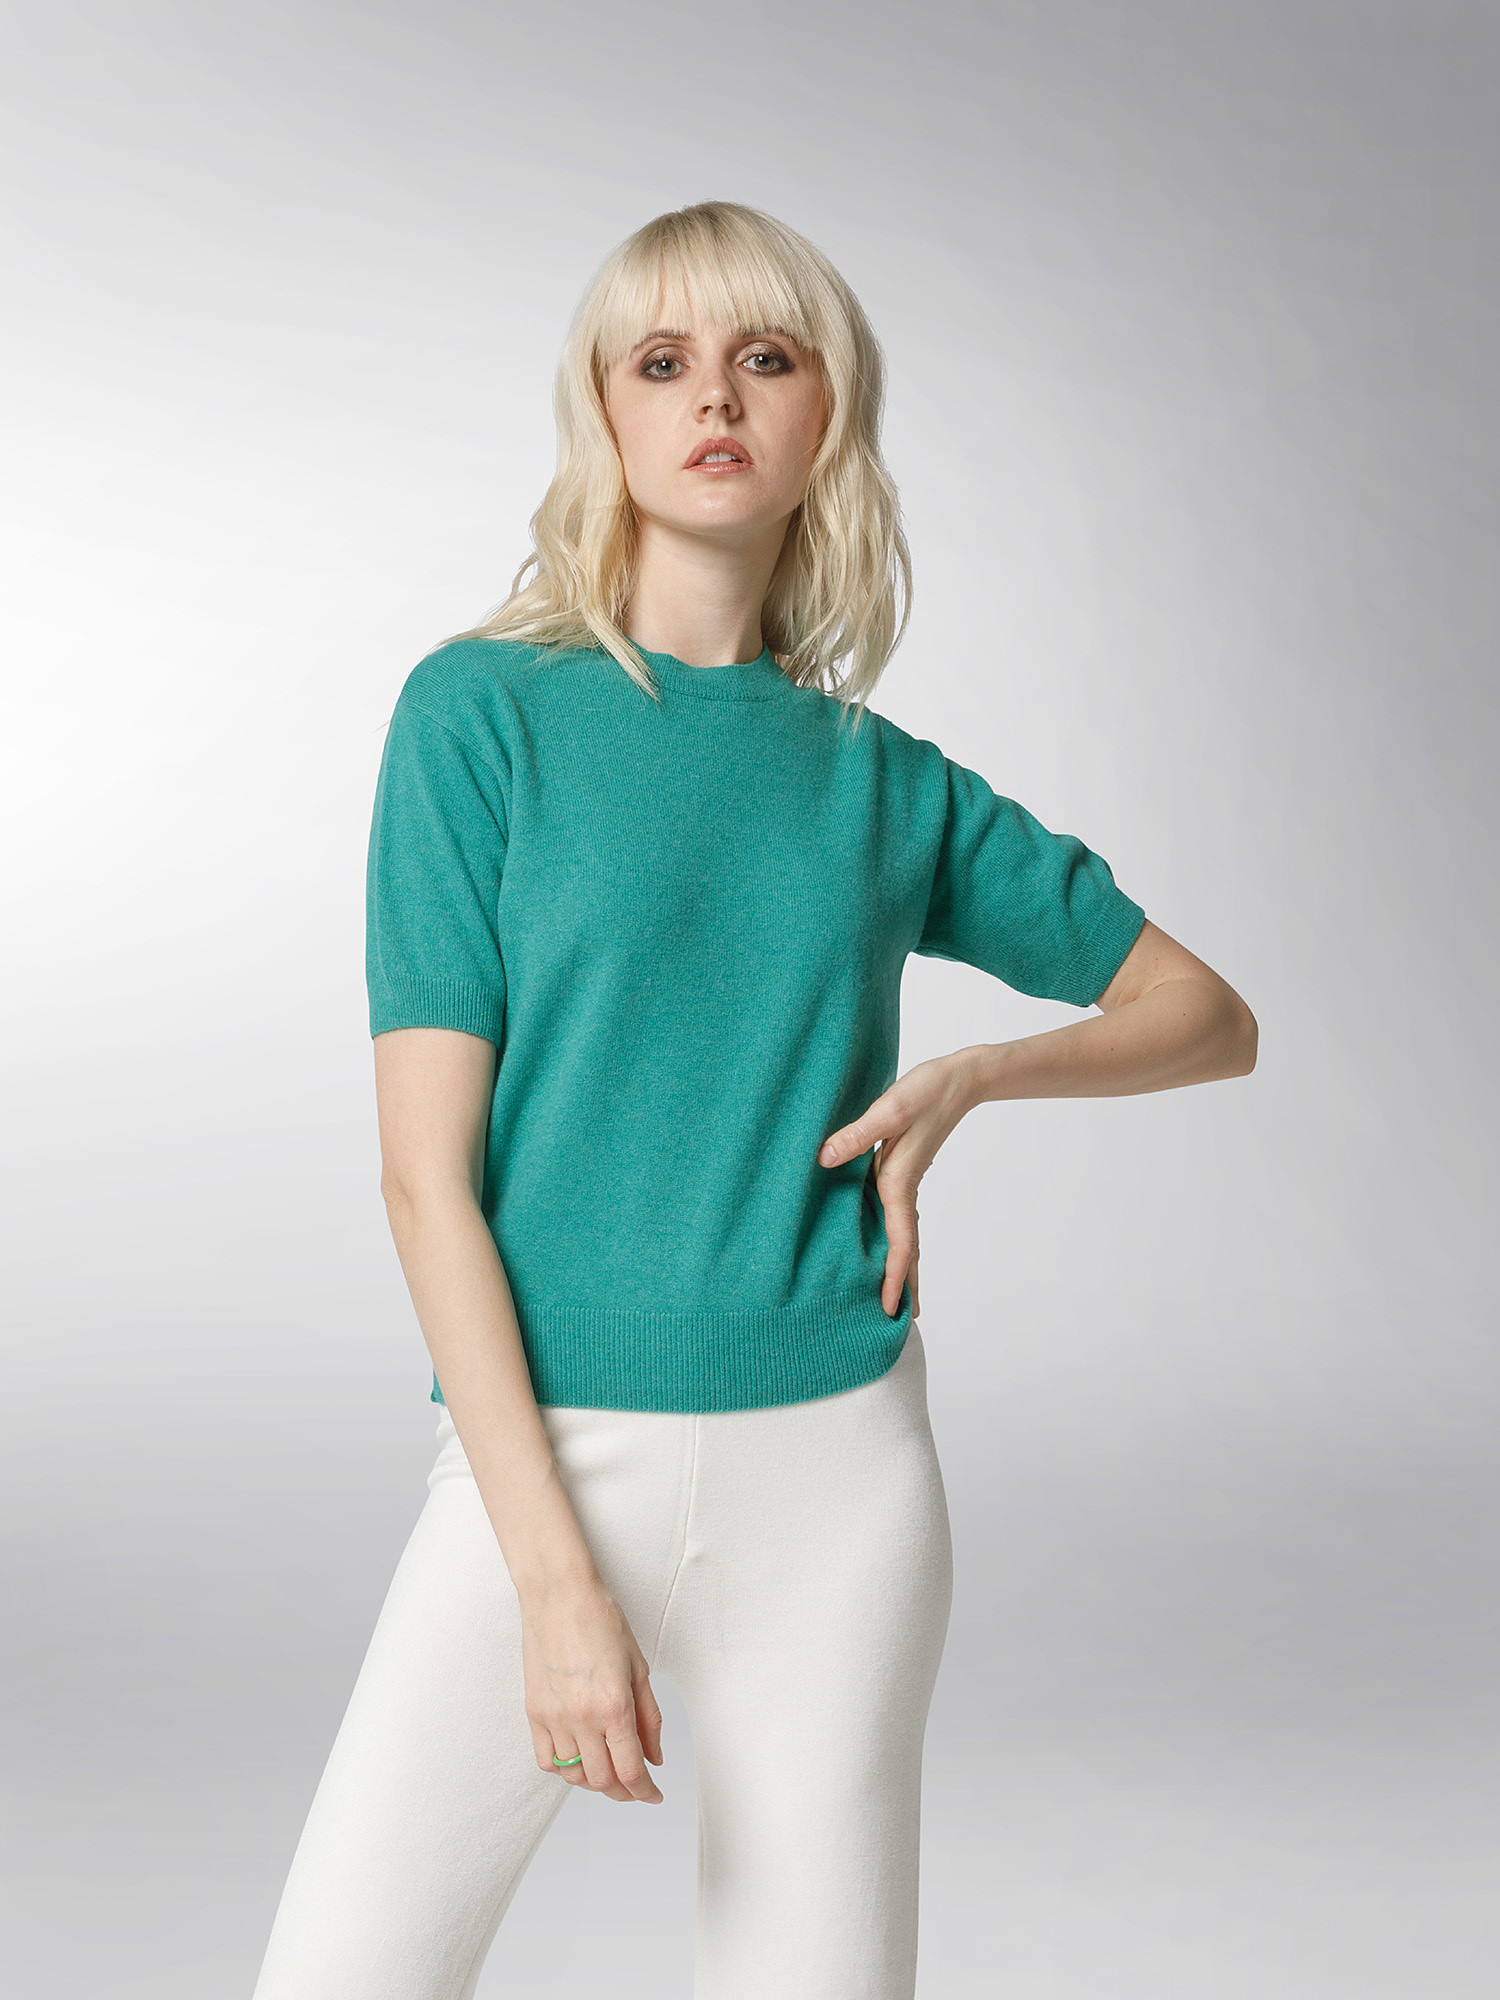 K Collection - Crewneck sweater, Emerald, large image number 3